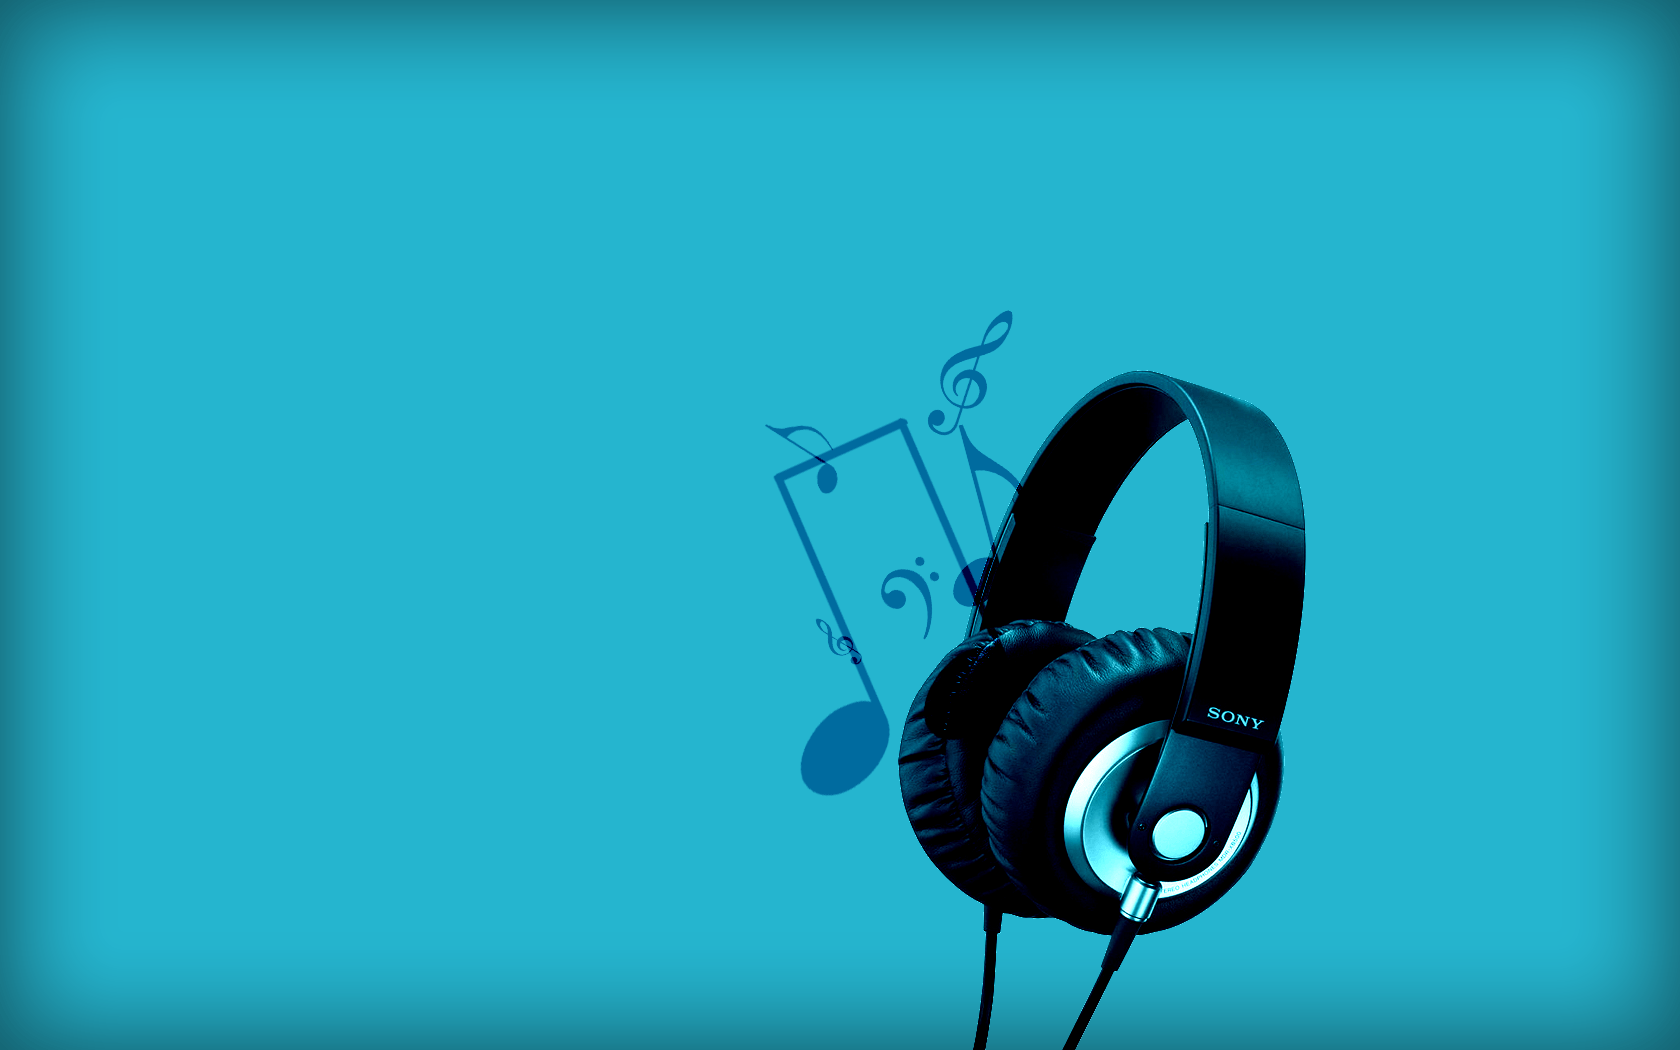 Blue Background Music Headphone Wallpaper Picture HD Free Wallpaper. Good quality headphones, Abstract wallpaper, Phone covers diy